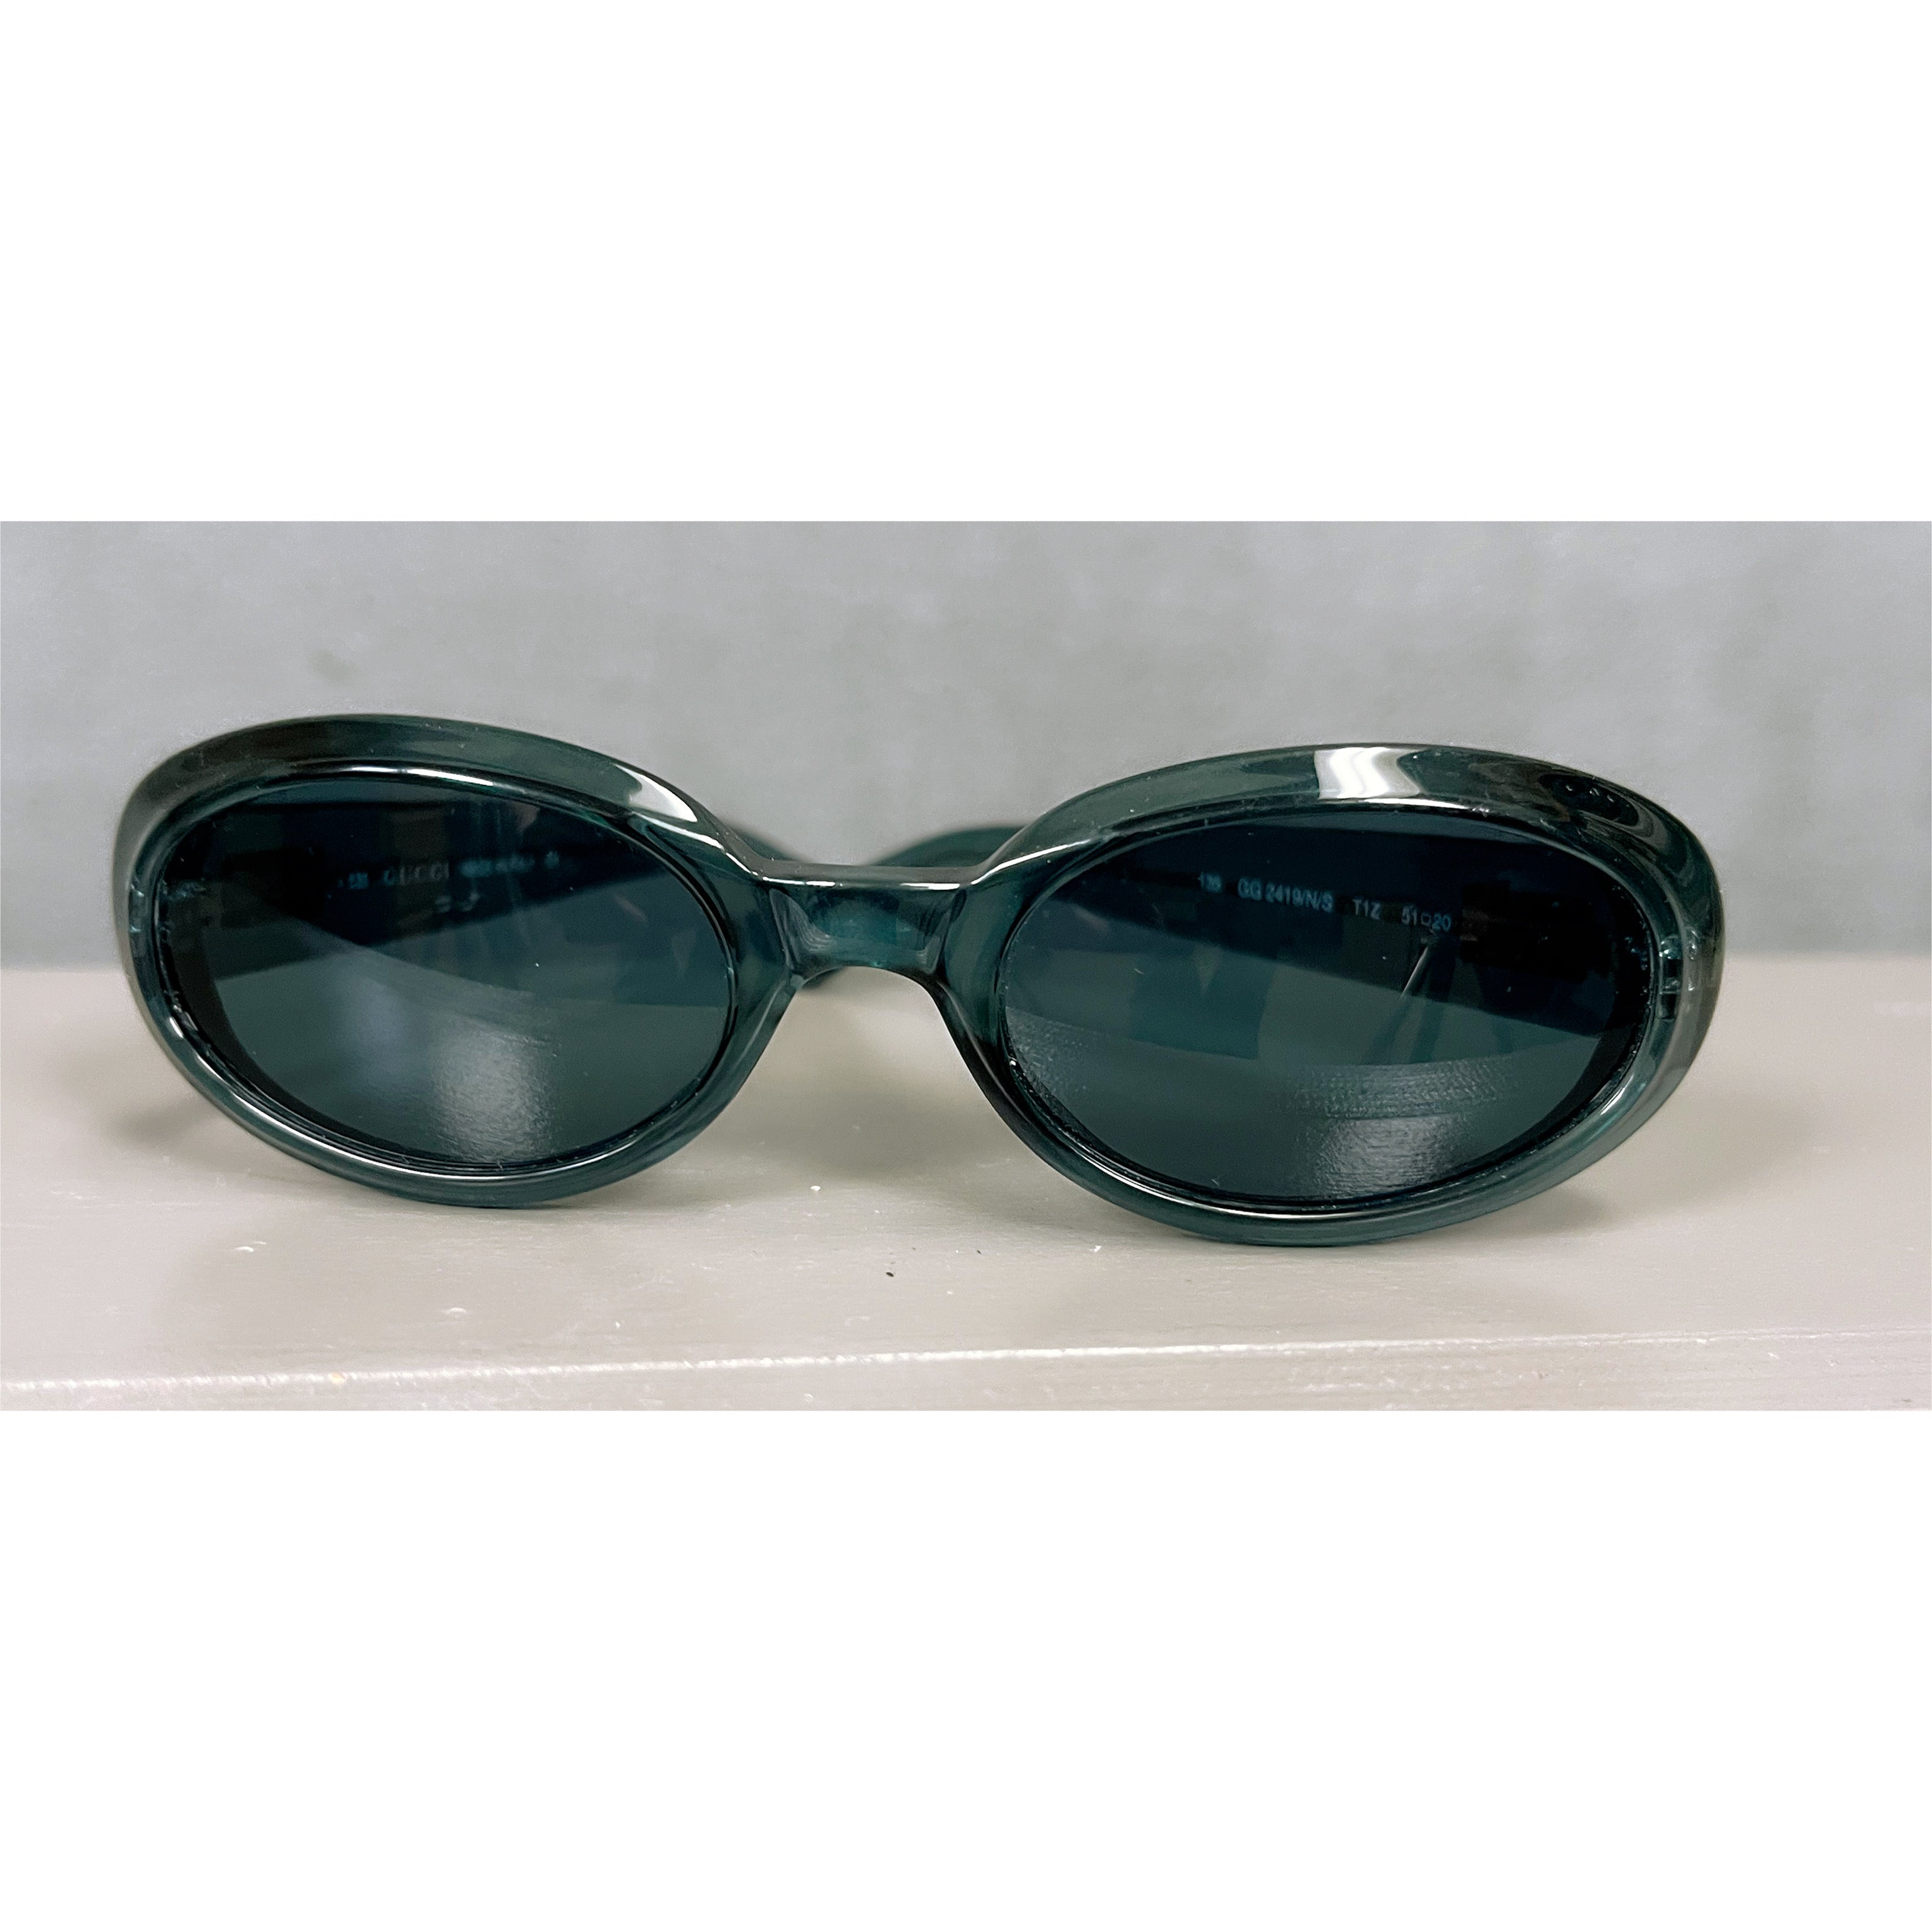 Gucci teal oval-frame sunglasses